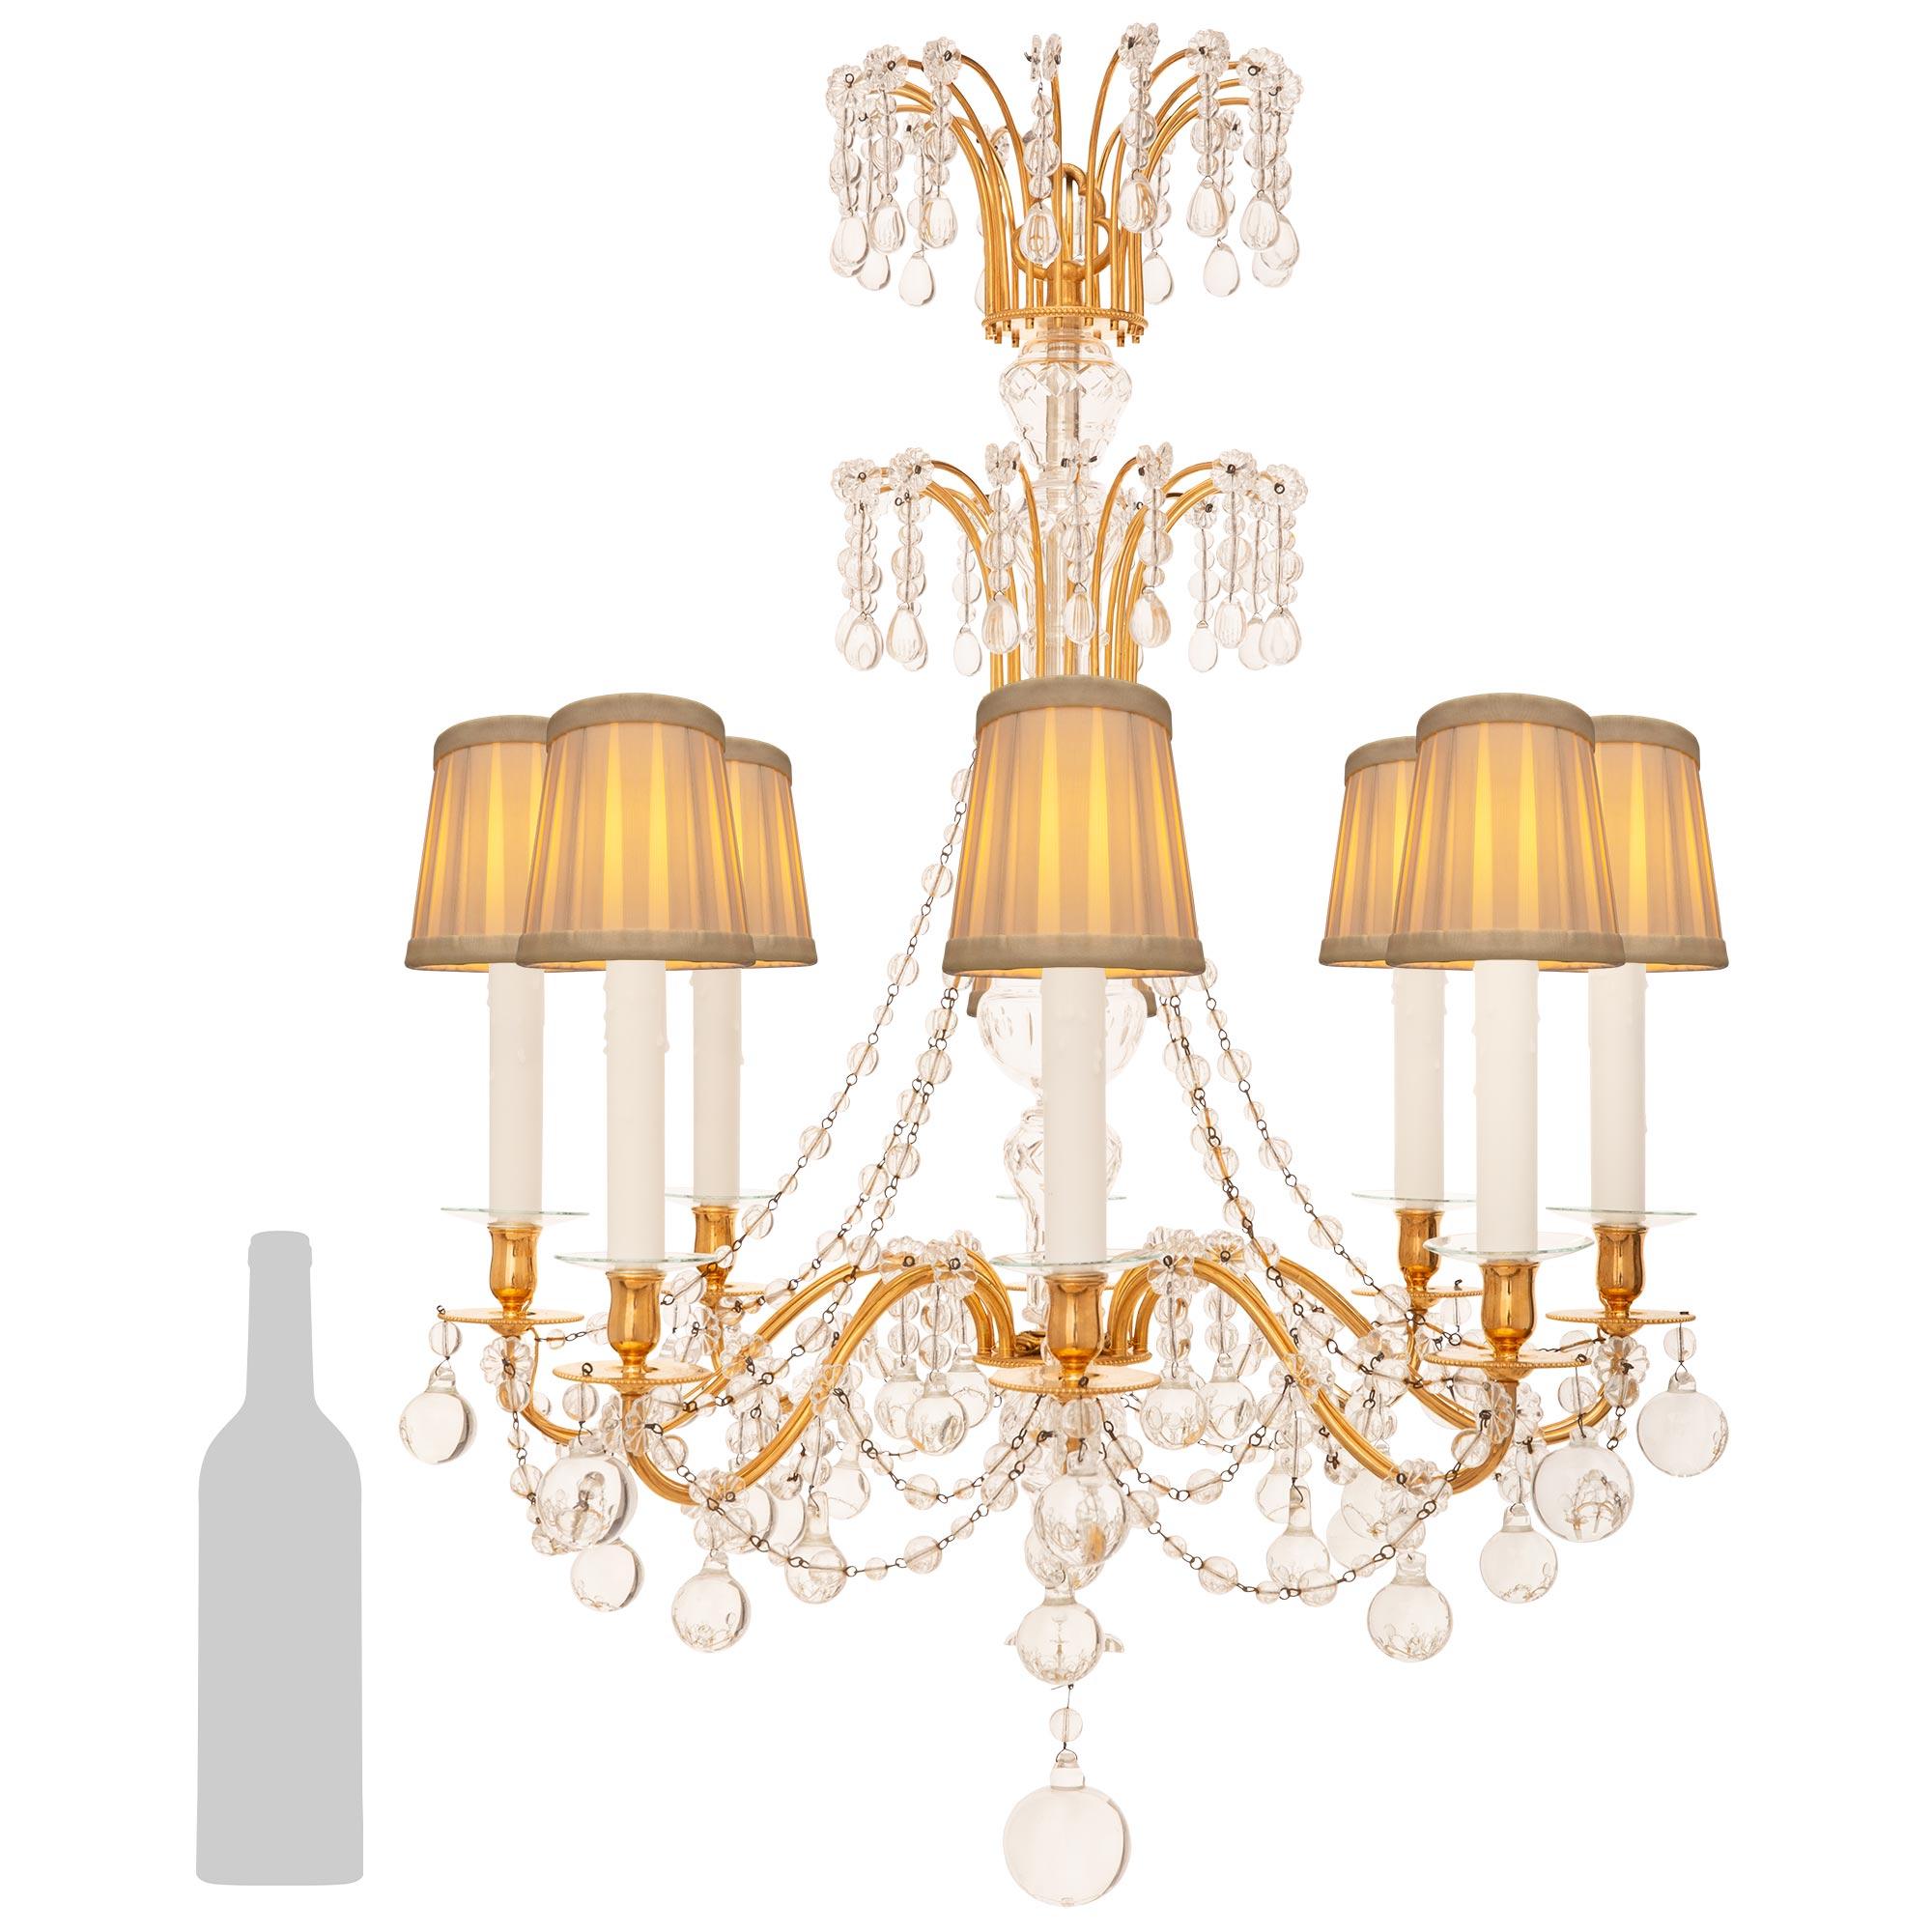 A stunning and high quality French Turn of the Century Louis XVI st. Ormolu and Crystal chandelier. This elegant eight light eight arm chandelier is centered by a bottom Ormolu finial with Crystal spheres and rosettes hanging below. The Crystal